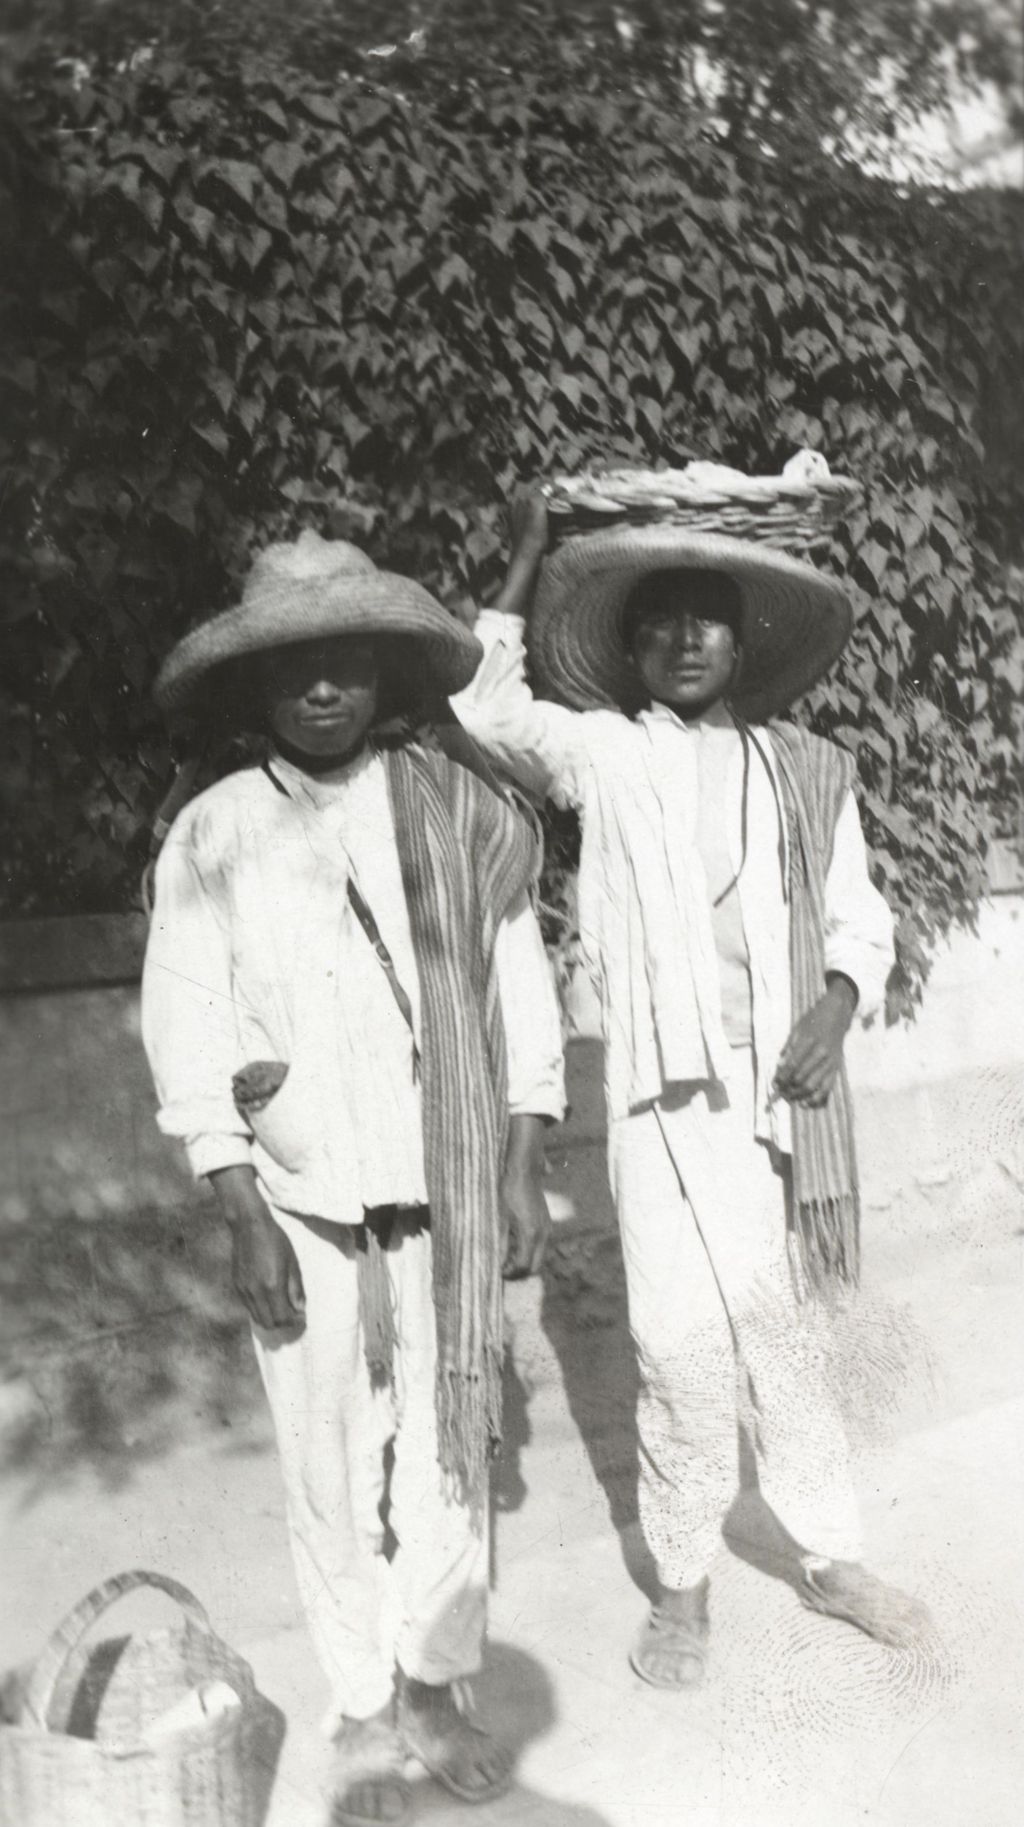 Two Mexican men with baskets photographed on Jane Addams' trip to Mexico